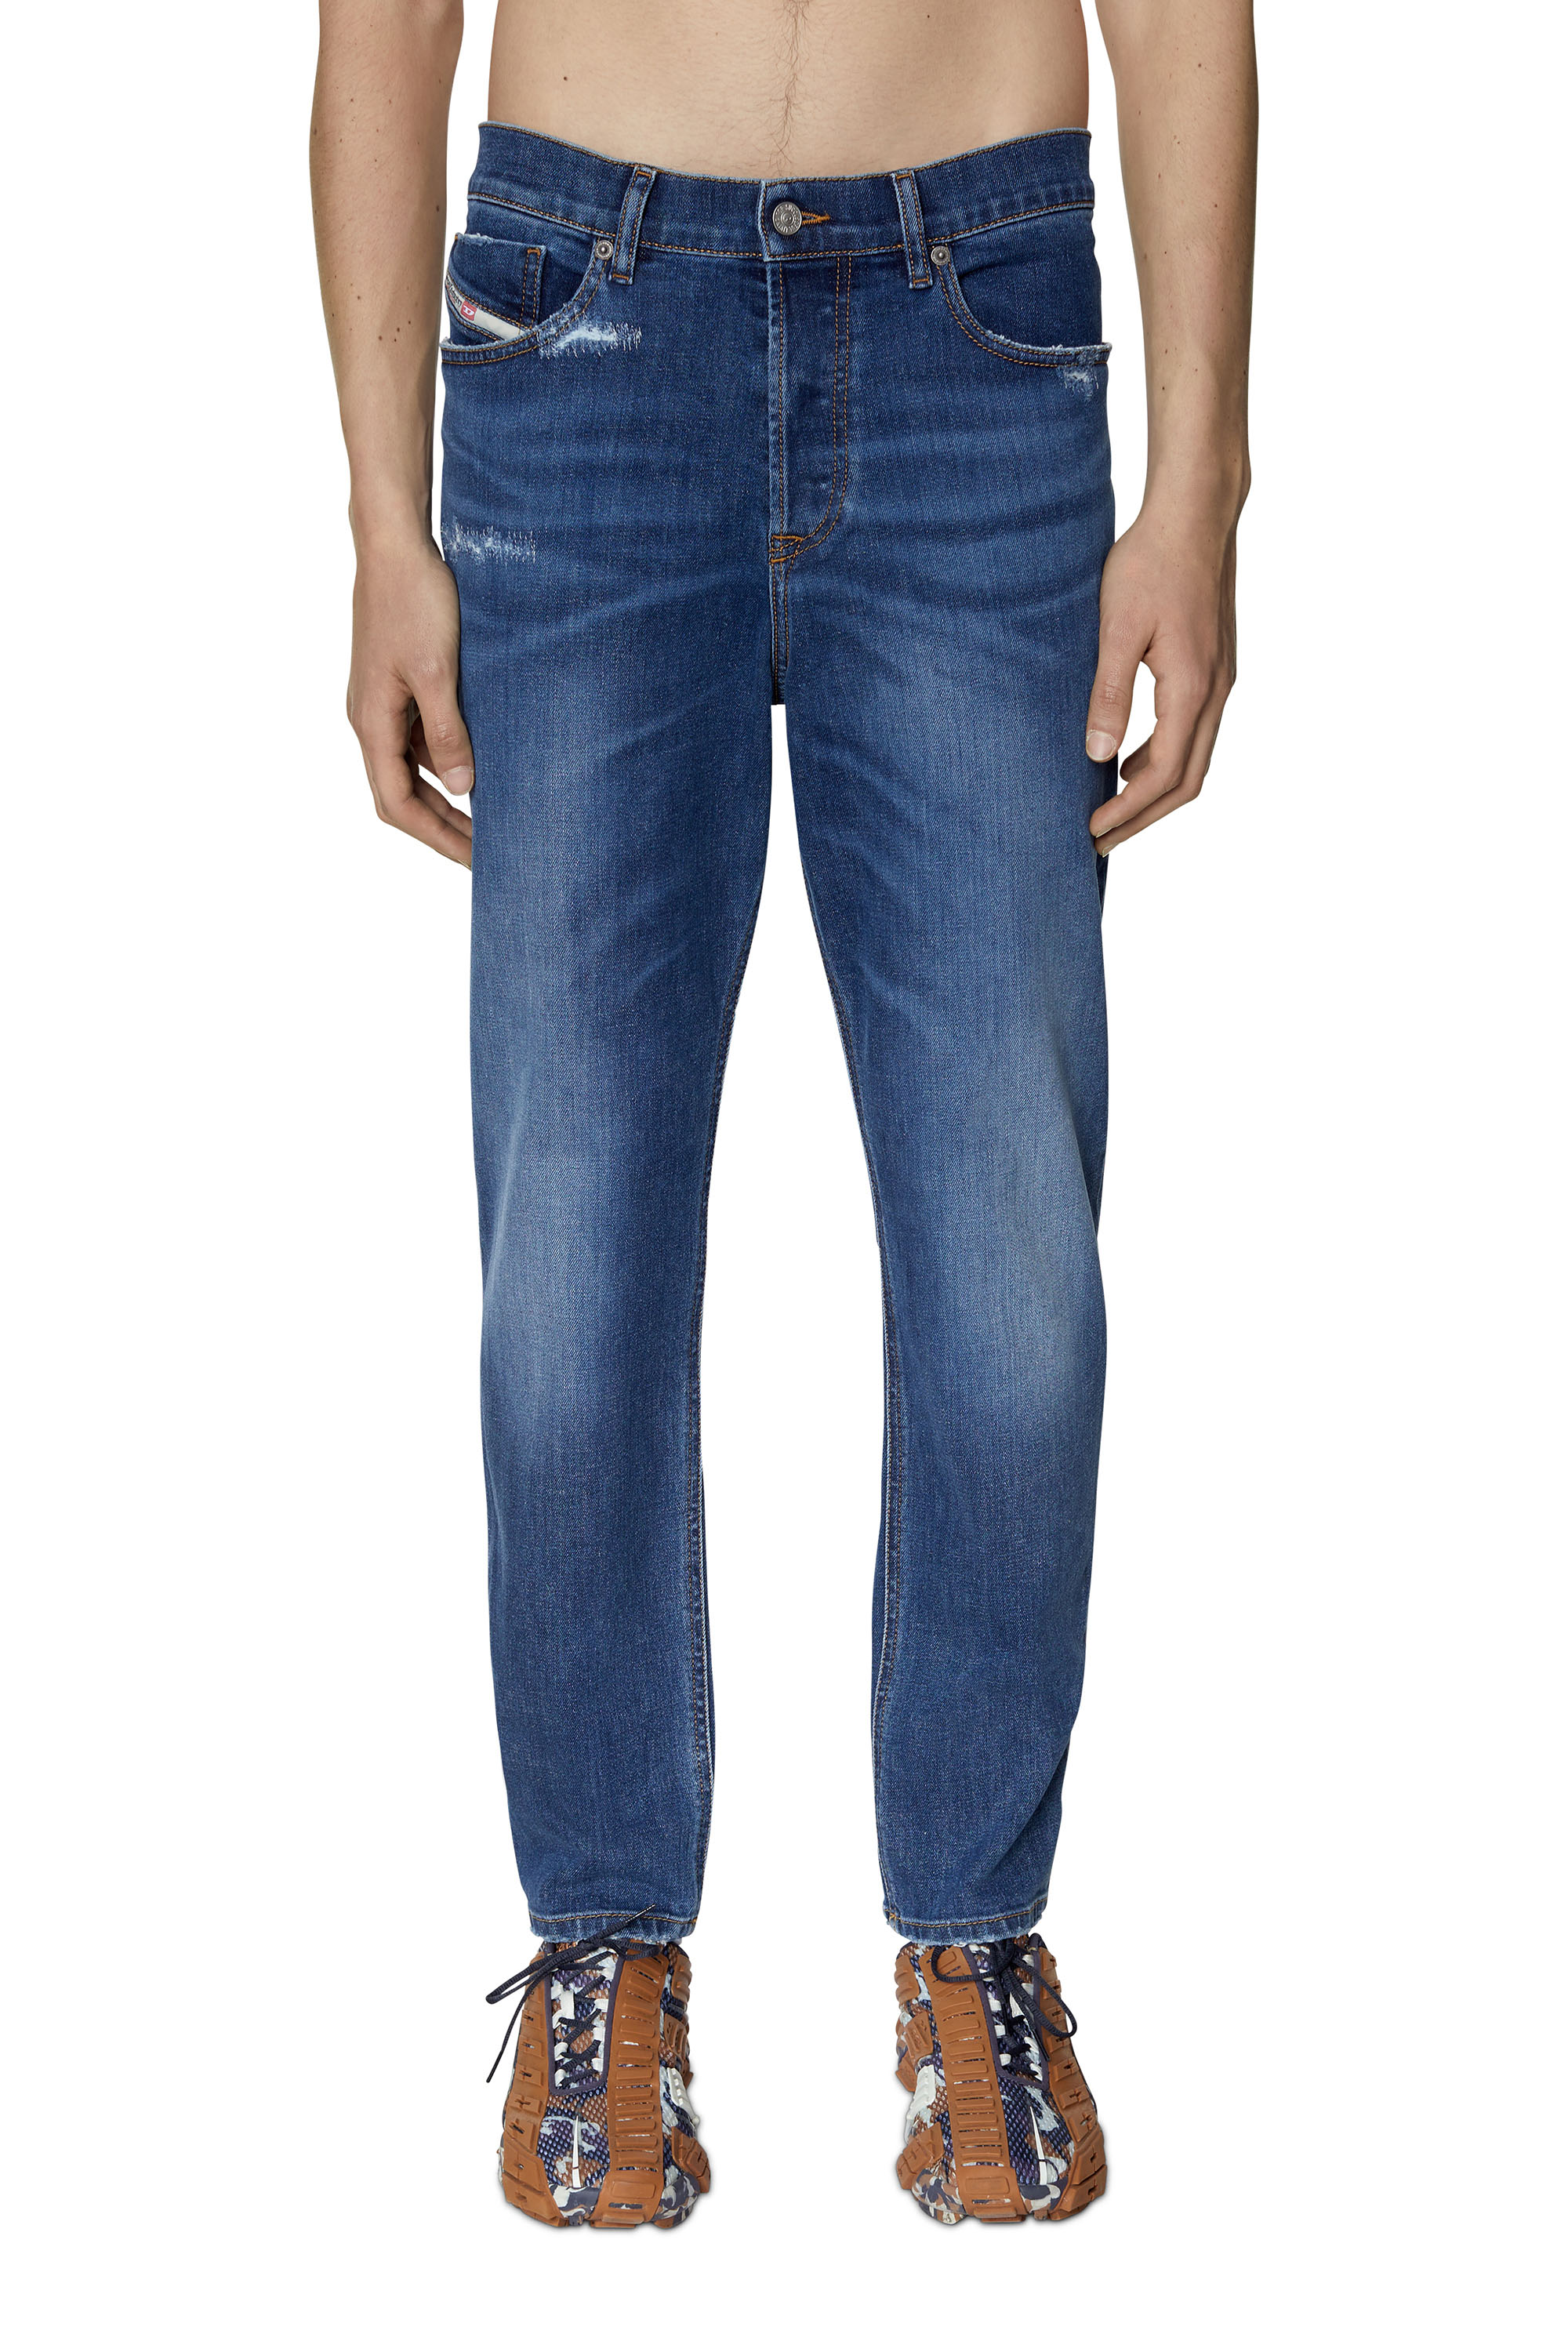 2005 D-FINING 09E07 Tapered Jeans, Medium blue - Jeans